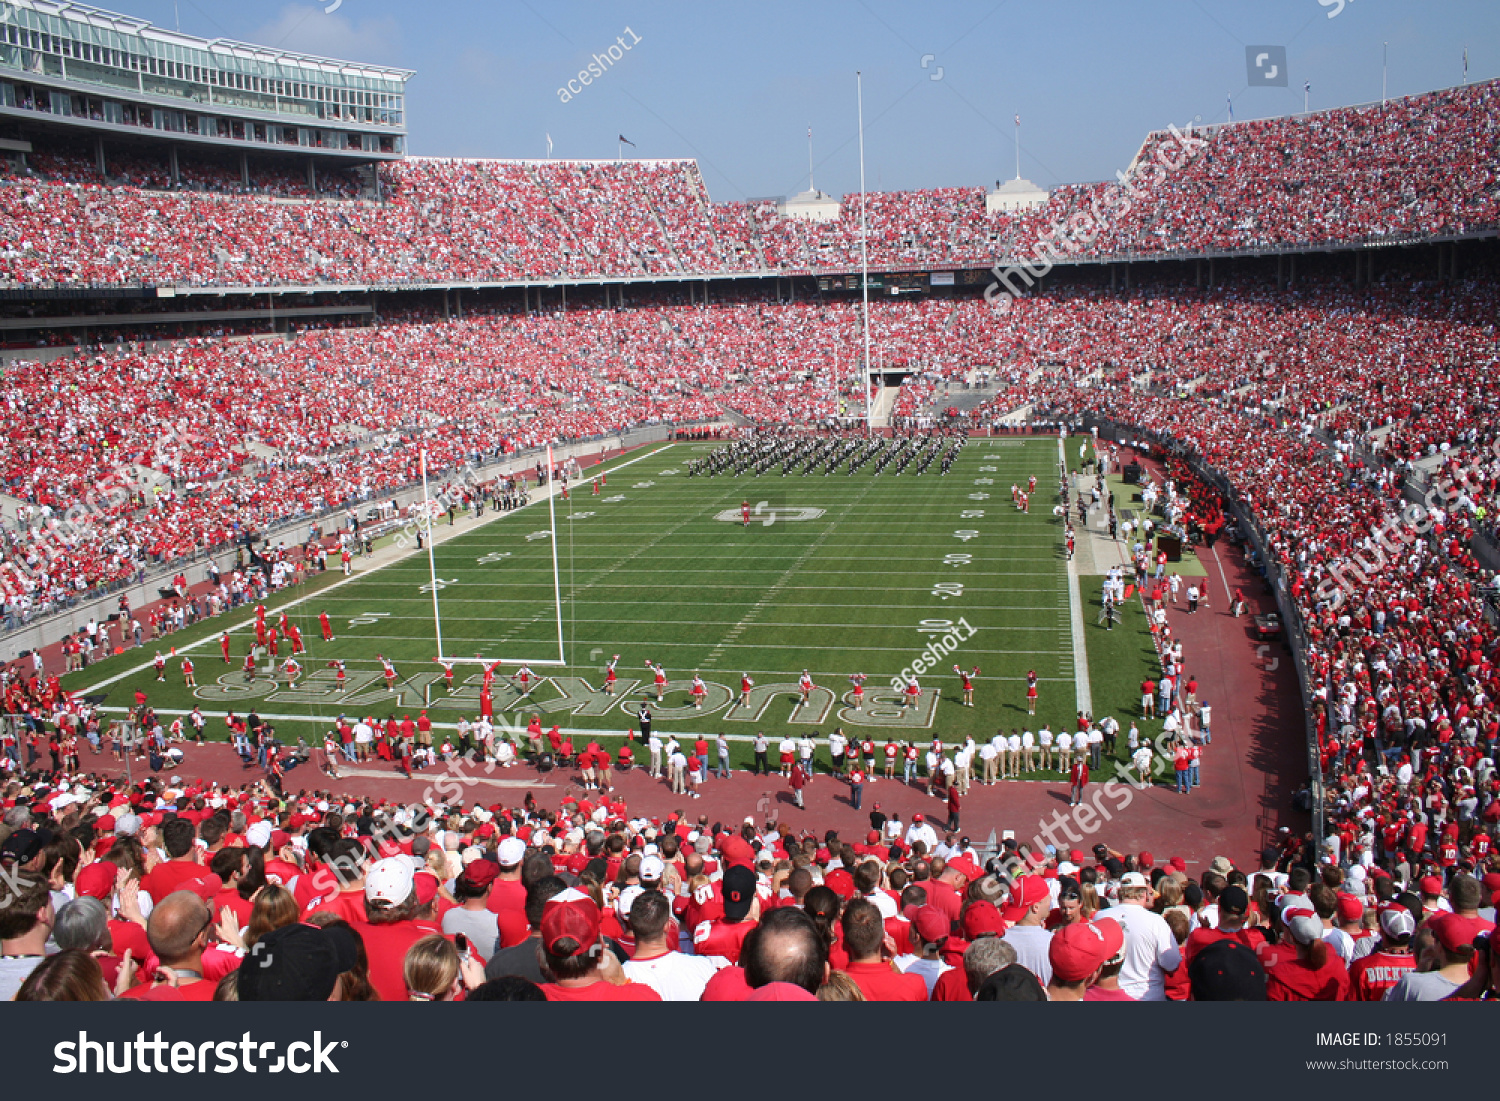 The Horseshoe At Ohio State-Editorial Use Only Stock Photo 1855091 ...